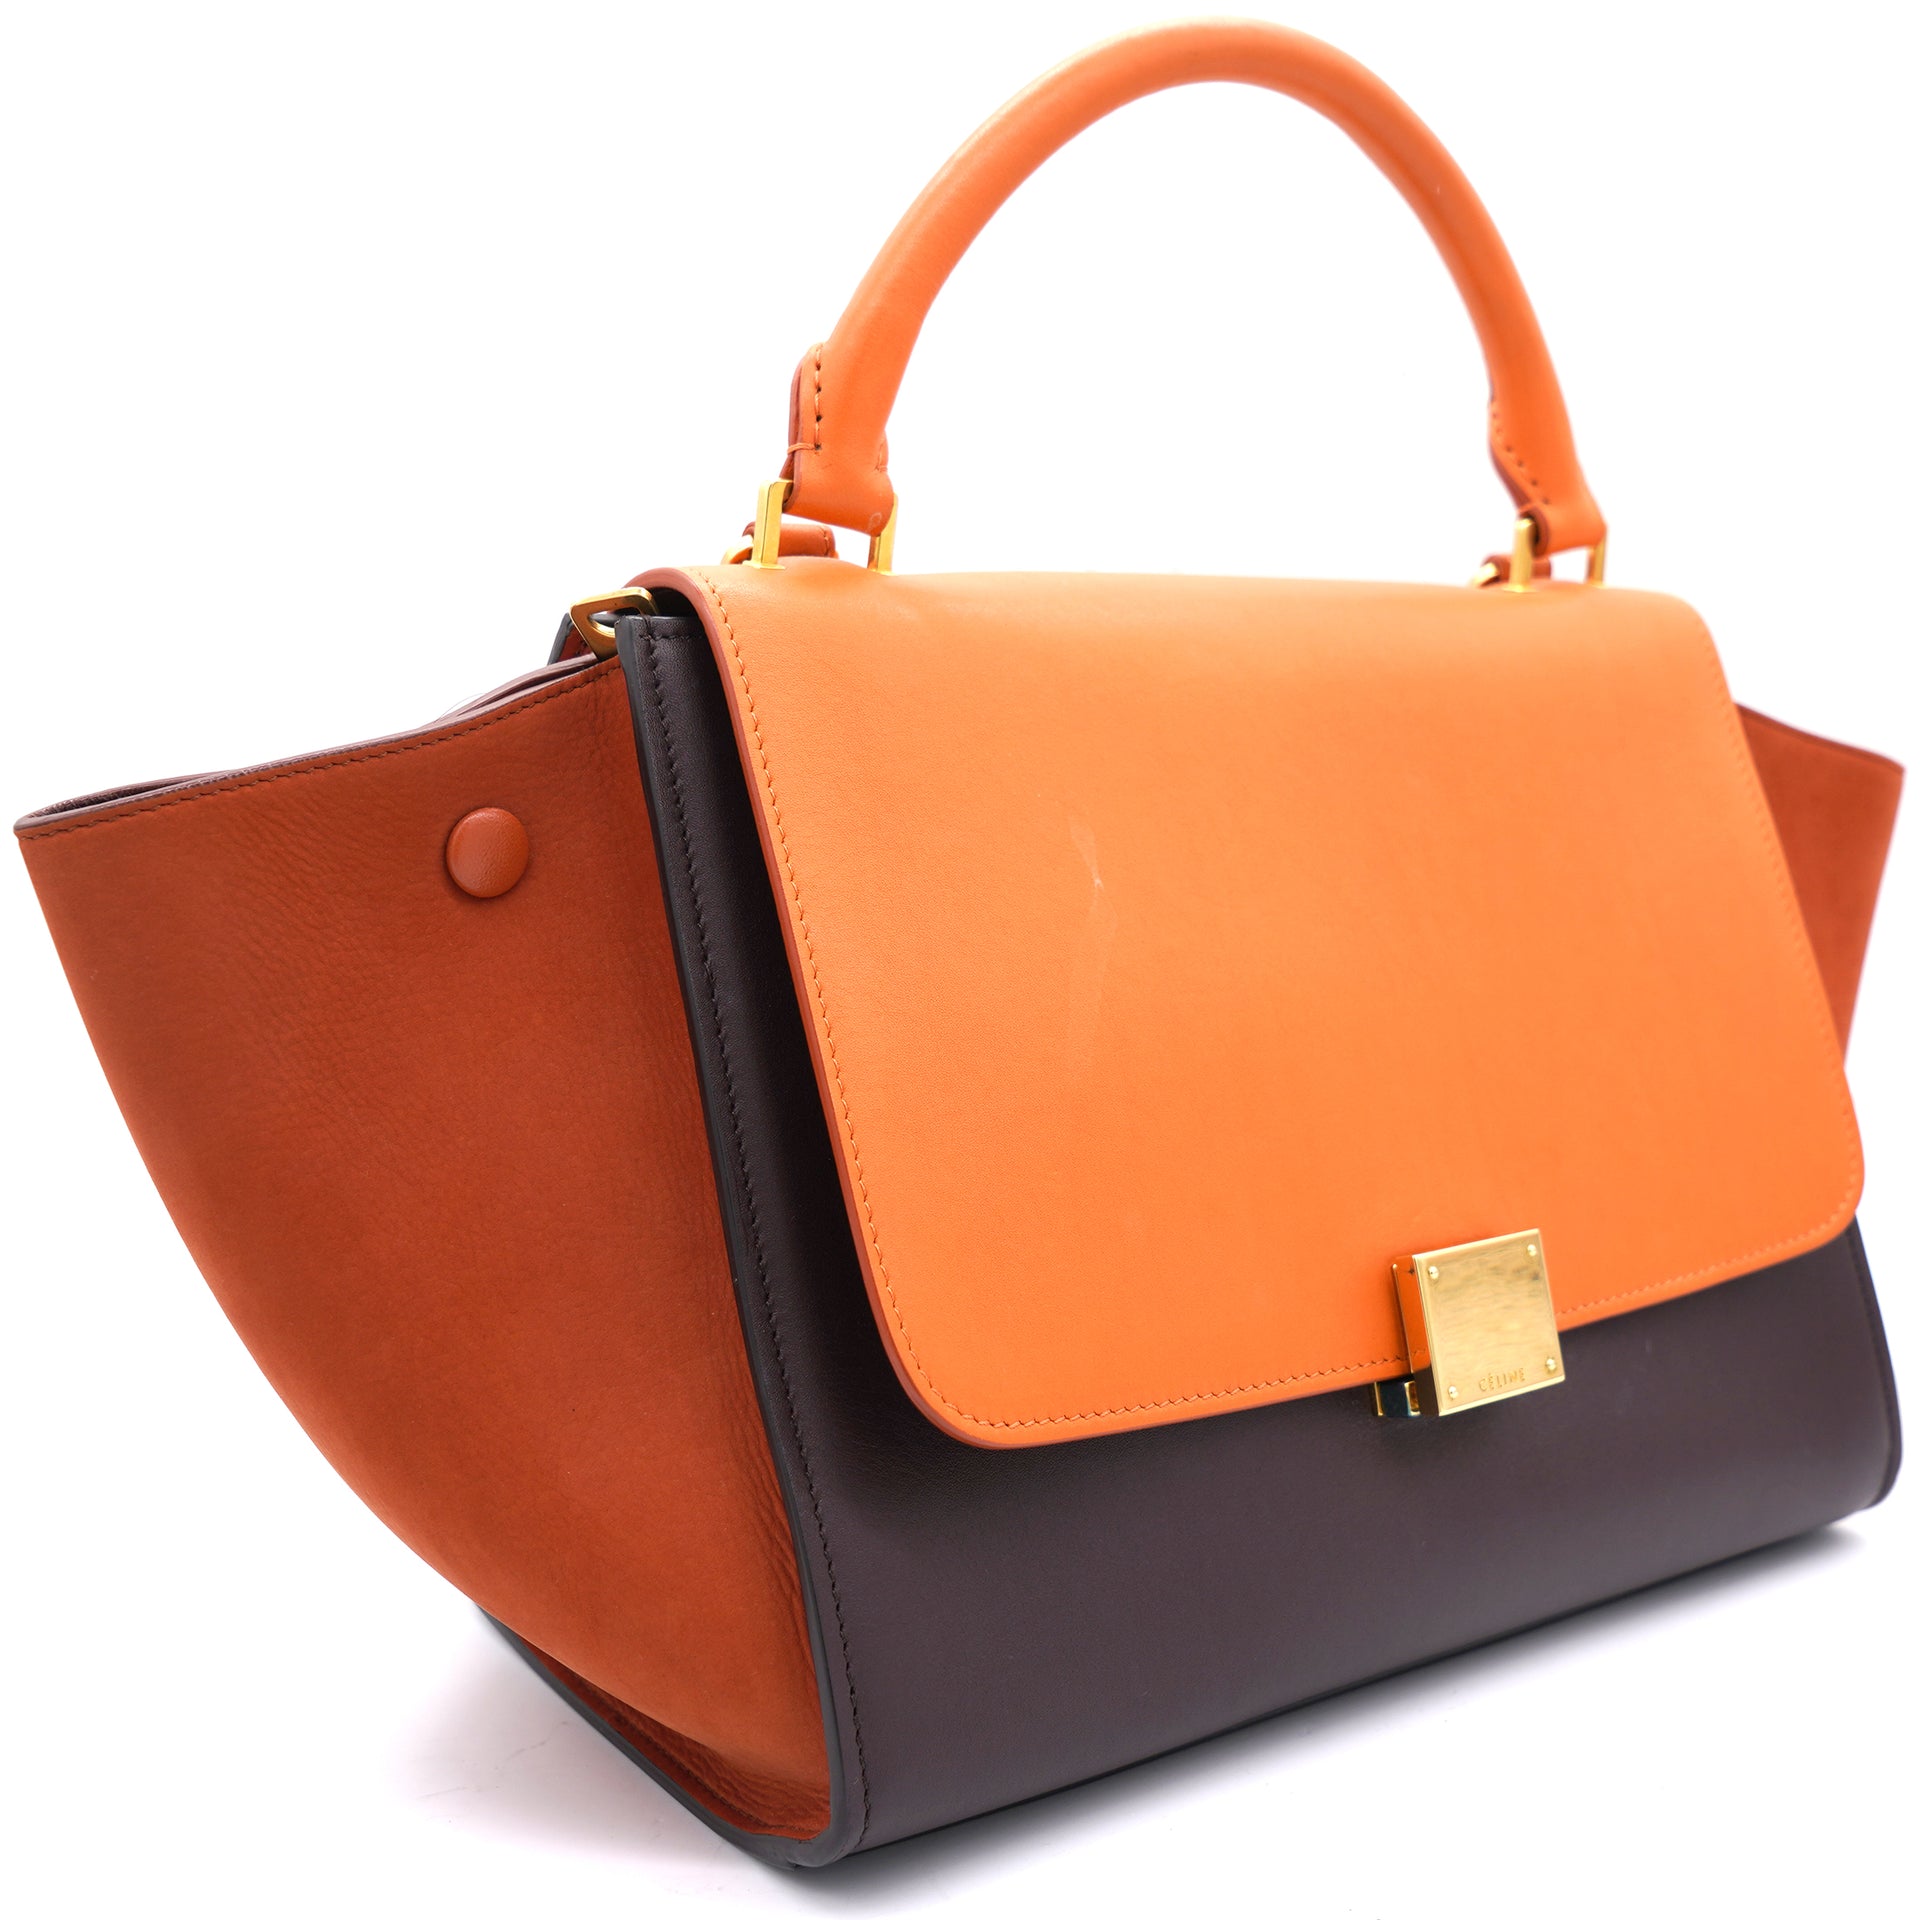 Tri-Color Leather and Suede Small Trapeze Top Handle Bag